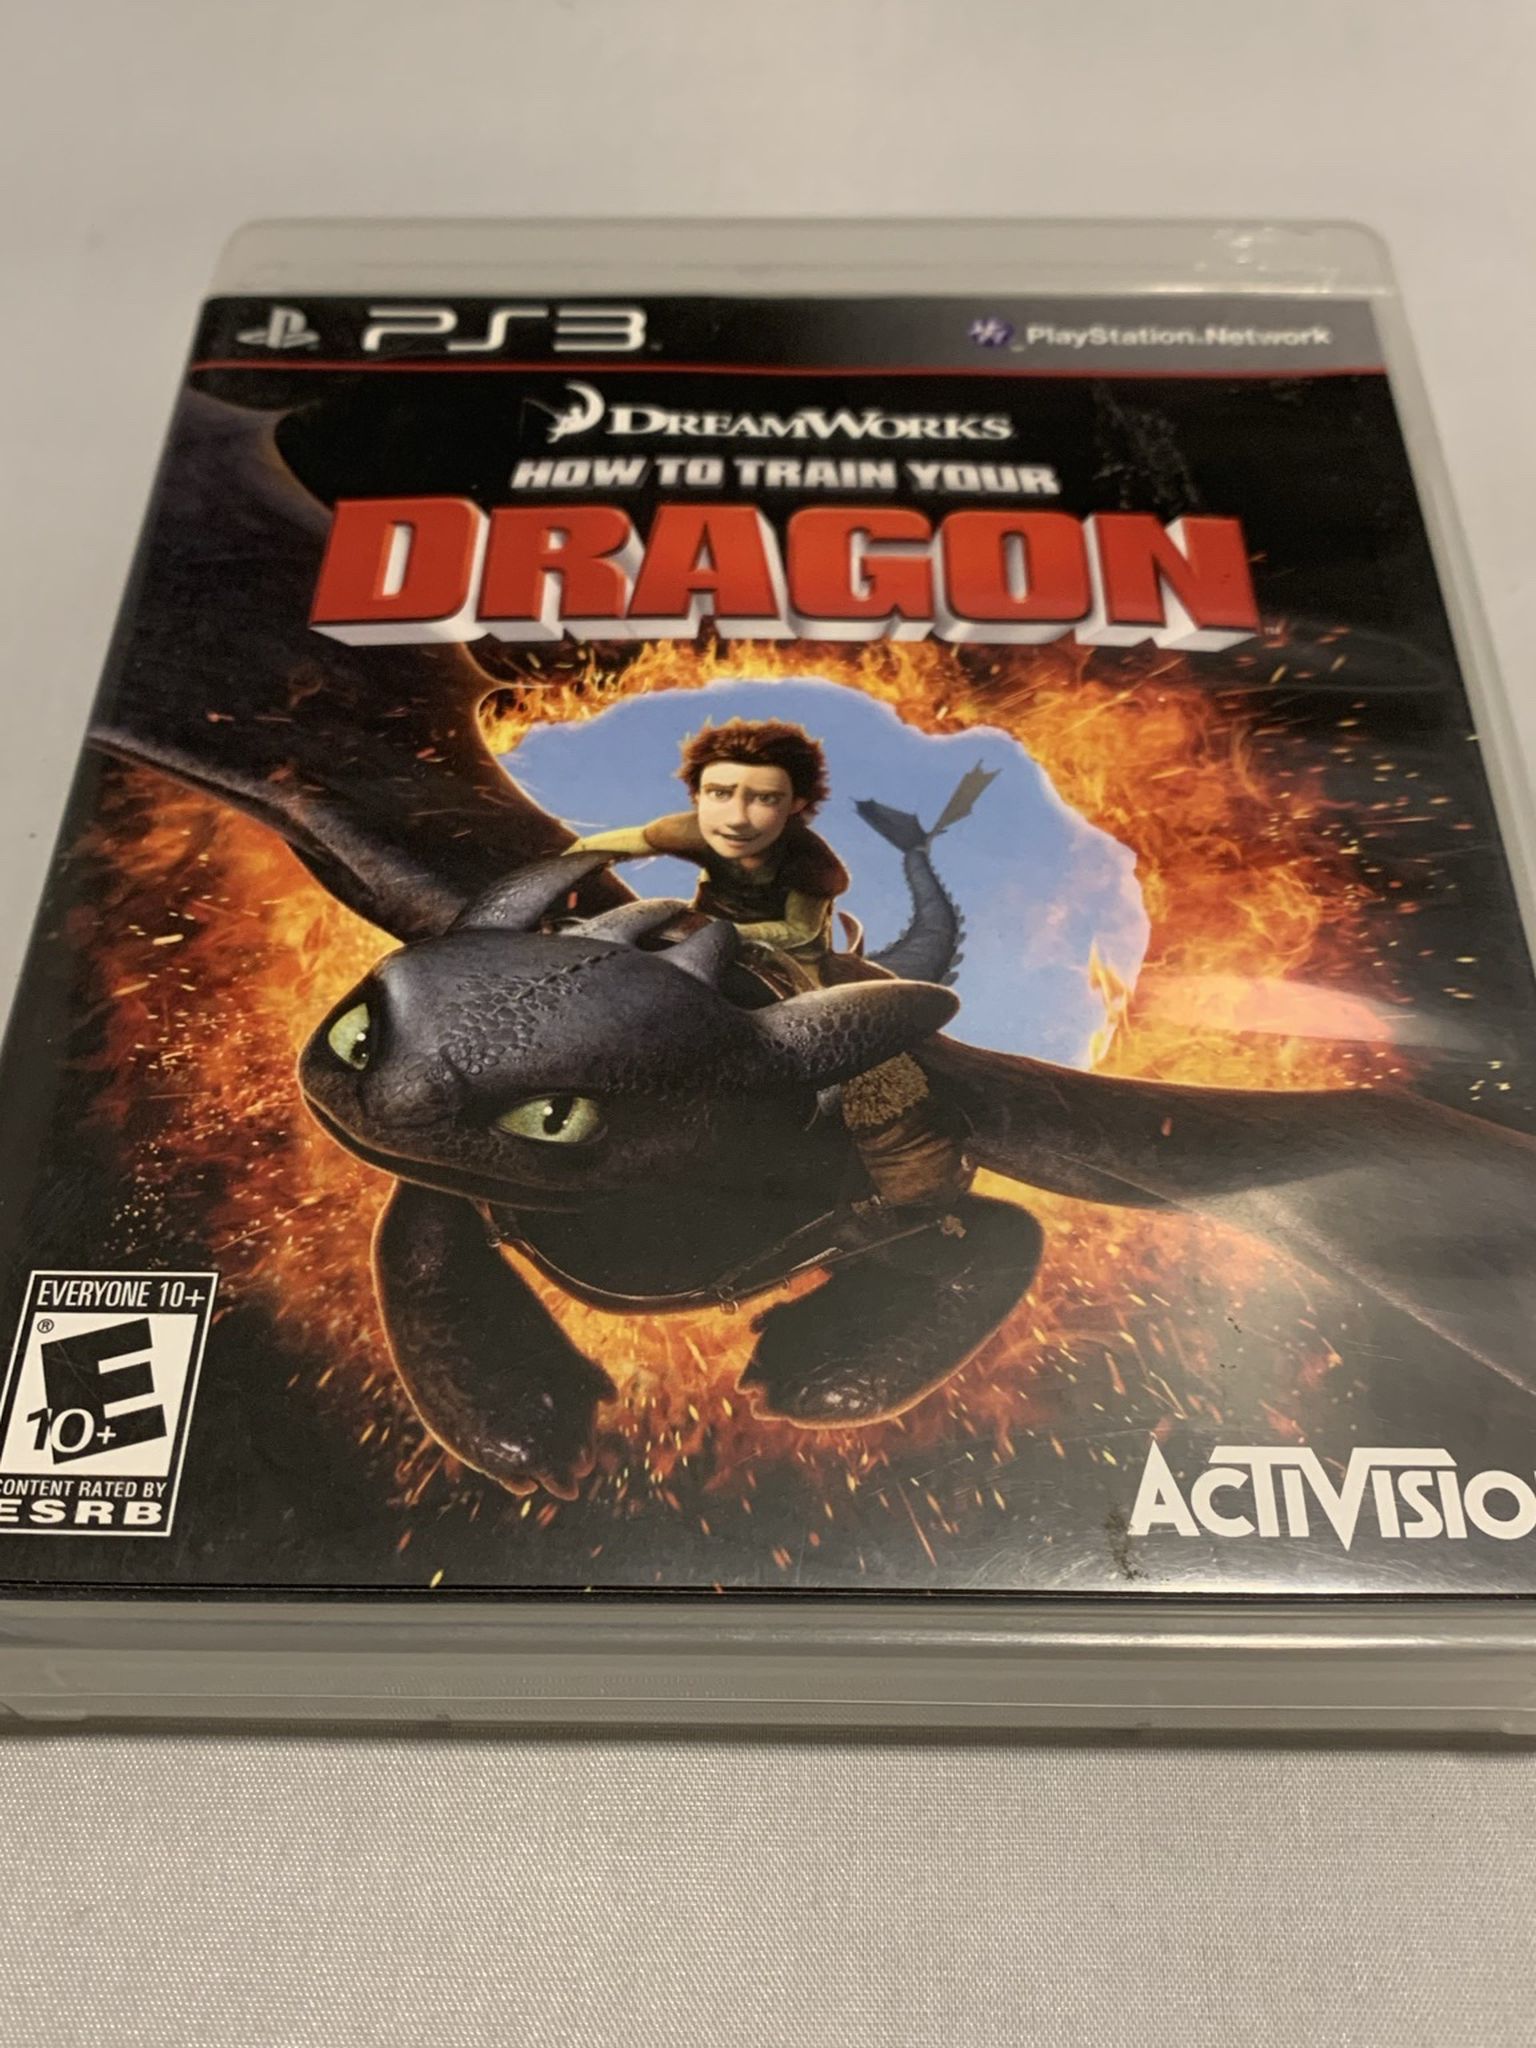 How To Train Your Dragon For PlayStation 3 PS3 Complete CIB Video Game